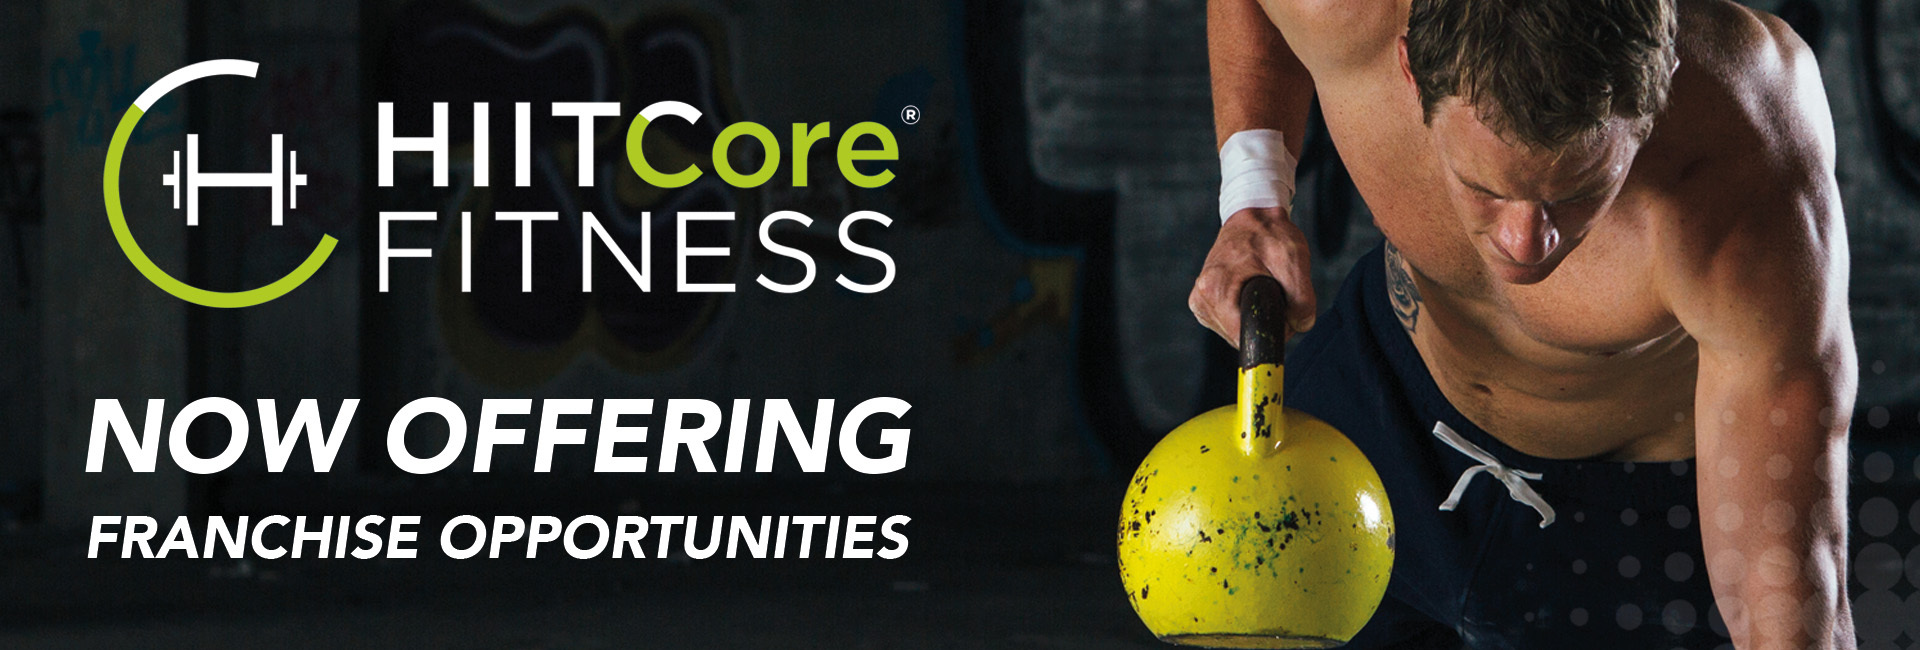 Now Offering Franchise Opportunities HIITCore Image Header. Man holding a kettlebell.